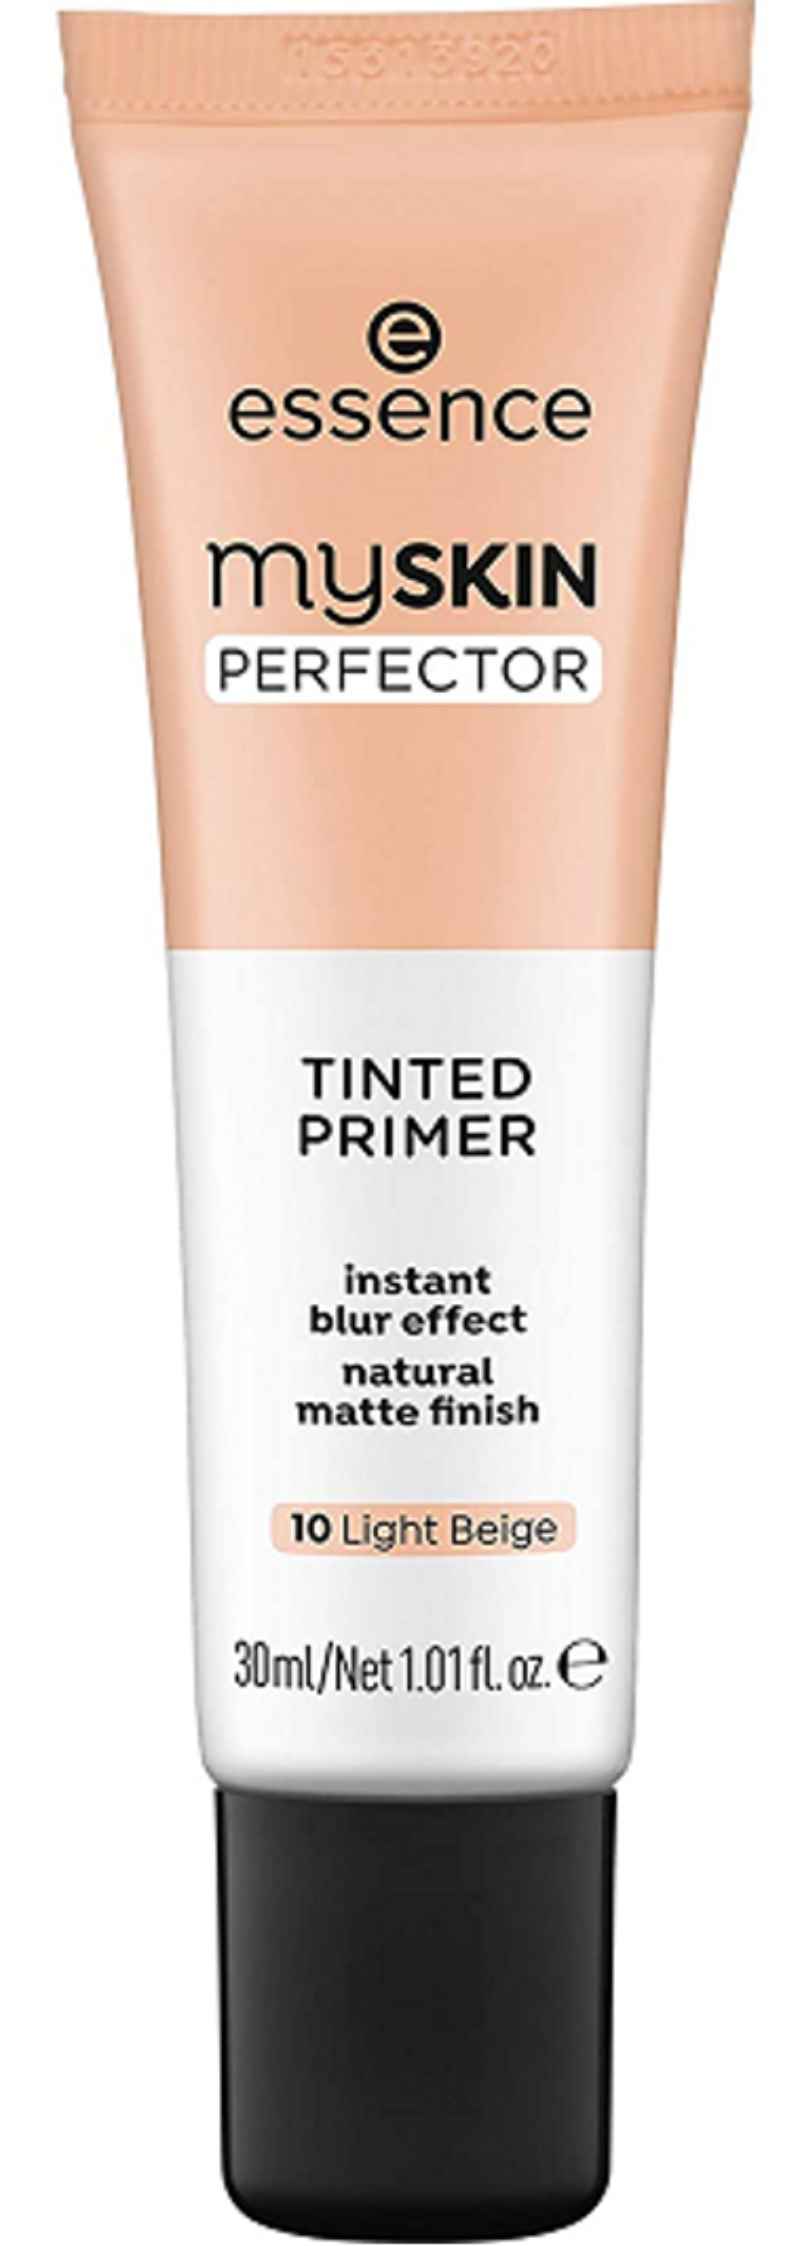 Cheap Primer: Essence My Skin Perfector Tinted Primer